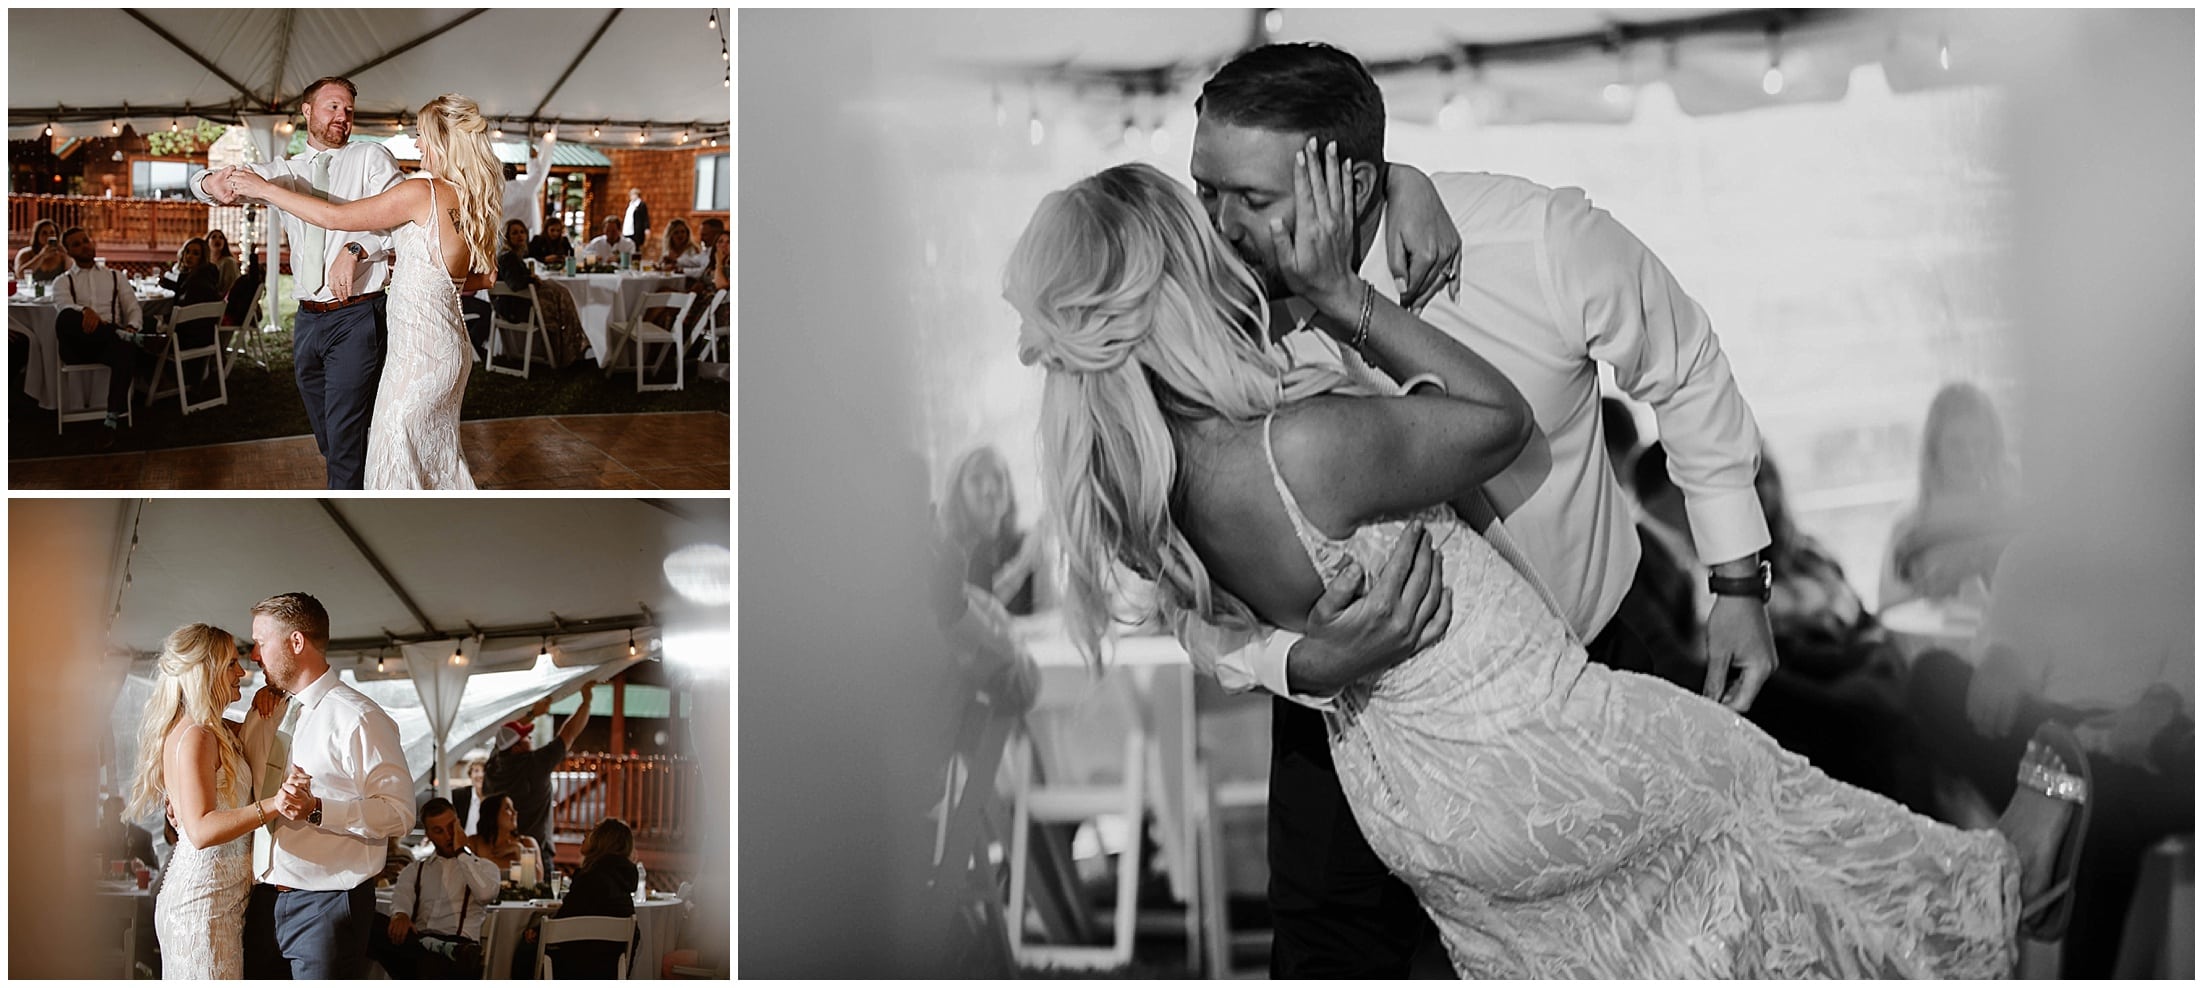 bride and groom first dance, Aspen Lodge, Red River New Mexico, Red River New Mexico Wedding, Weddings in New Mexico, Destination mountain wedding, destination mountain elopement, elopements in new mexico, places to get married in new mexico, destination elopement photographer, mountain wedding photographer, new mexico wedding photographer, new mexico elopement photographer, brit nicole photography, cabin wedding, new mexico cabin wedding, mountain landscape for wedding, small intimate mountain wedding, small intimate river wedding, wedding photographer in new mexico, junebug weddings, the knot, wedding wire, 41 productions with lindsay gomez, dallas texas bride, DJ Allen Gallegos, Tao Cakes, New Mexico Wedding planner karen kelly, barnes jewelry, Lillian West bridal dress, Lang’s Bridal, enchanted florist wedding flowers, places to get married in texas, texas wedding photographer, texas elopement photographer, forest wedding, forest elopement, wooded area for wedding, wooded elopement, elopement in the woods, amarillo wedding photographer, amarillo elopement photographer